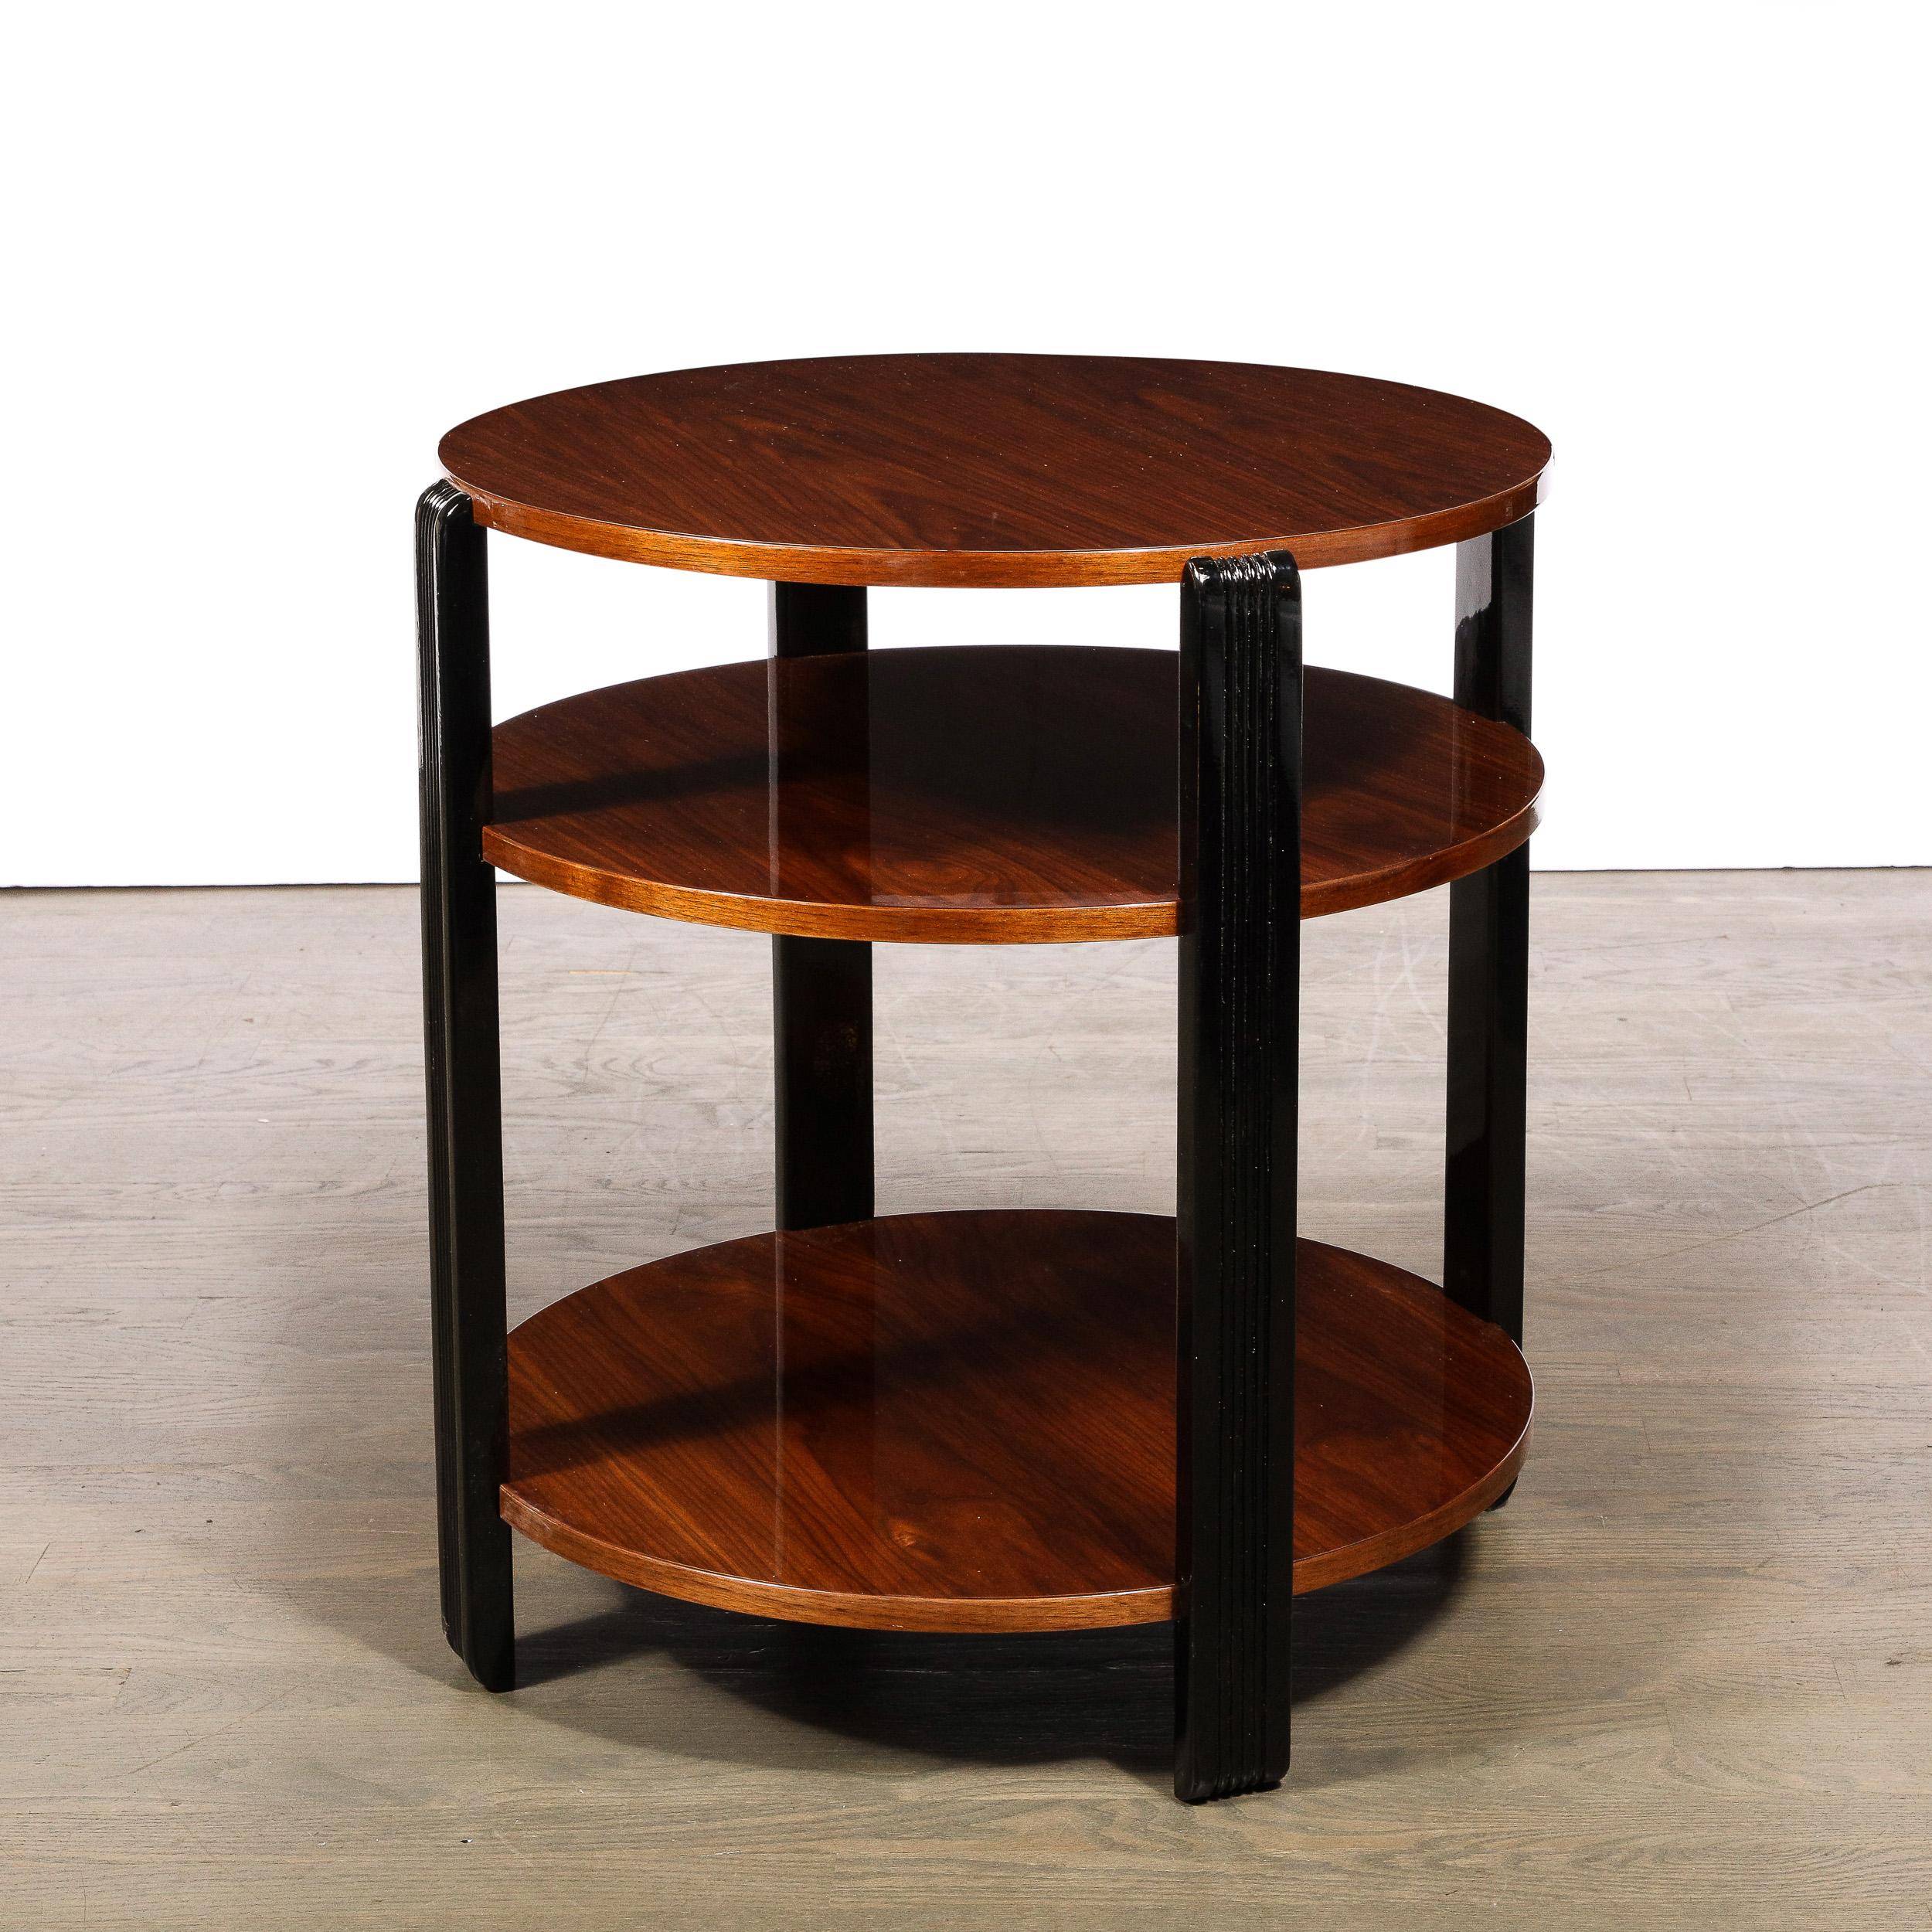 3 tier side table round